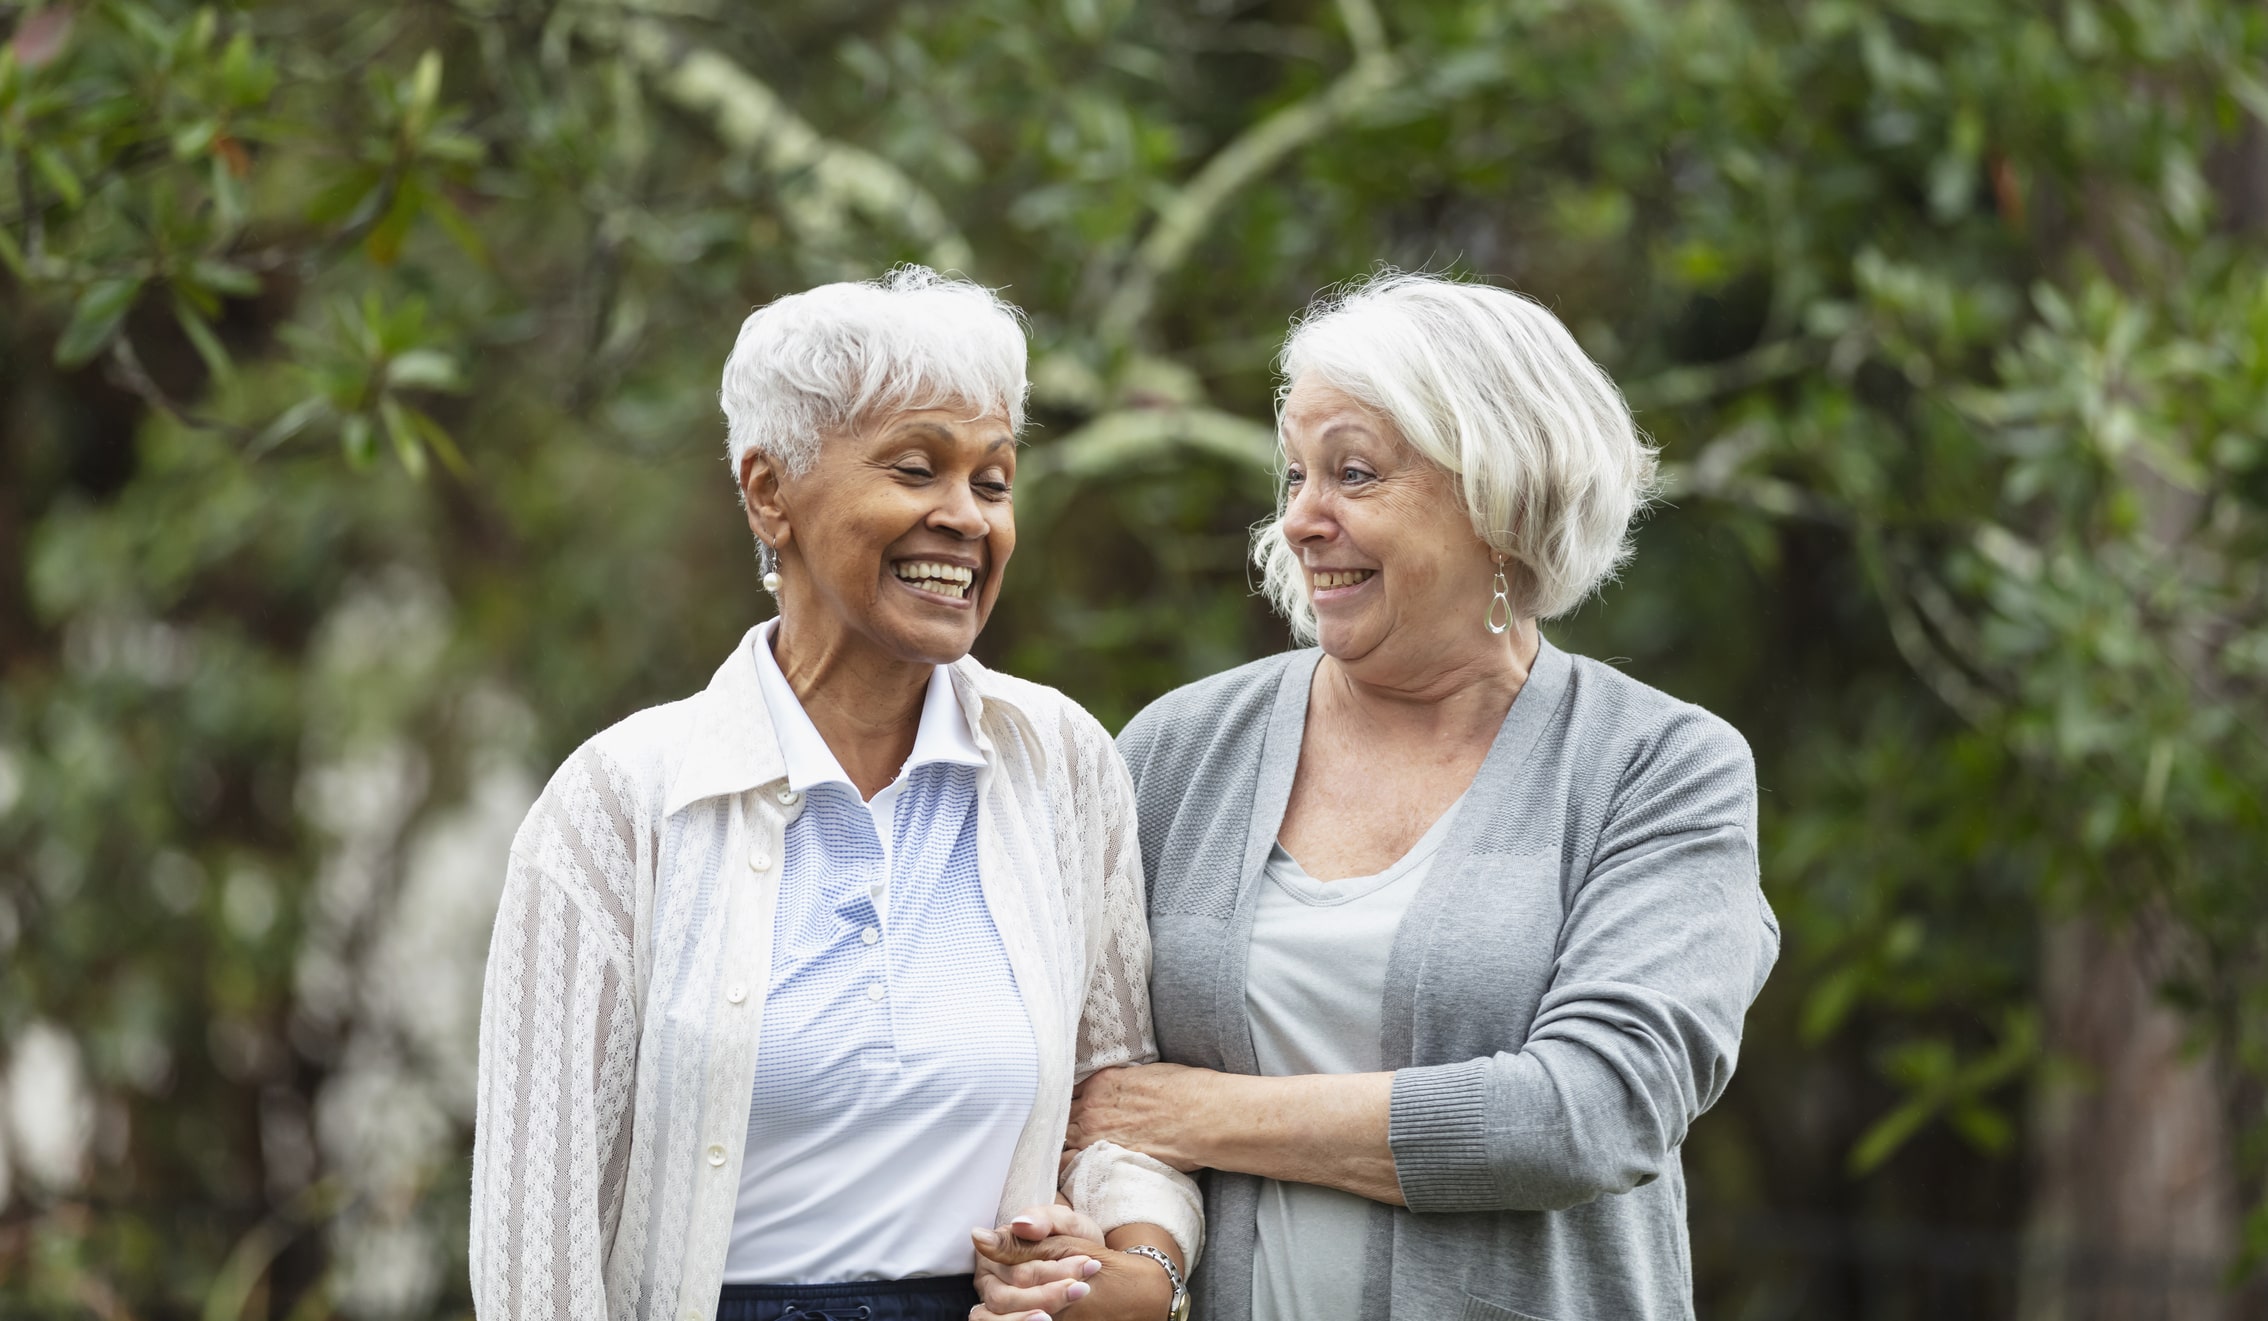 two older women standing next to each other and smiling with arms together